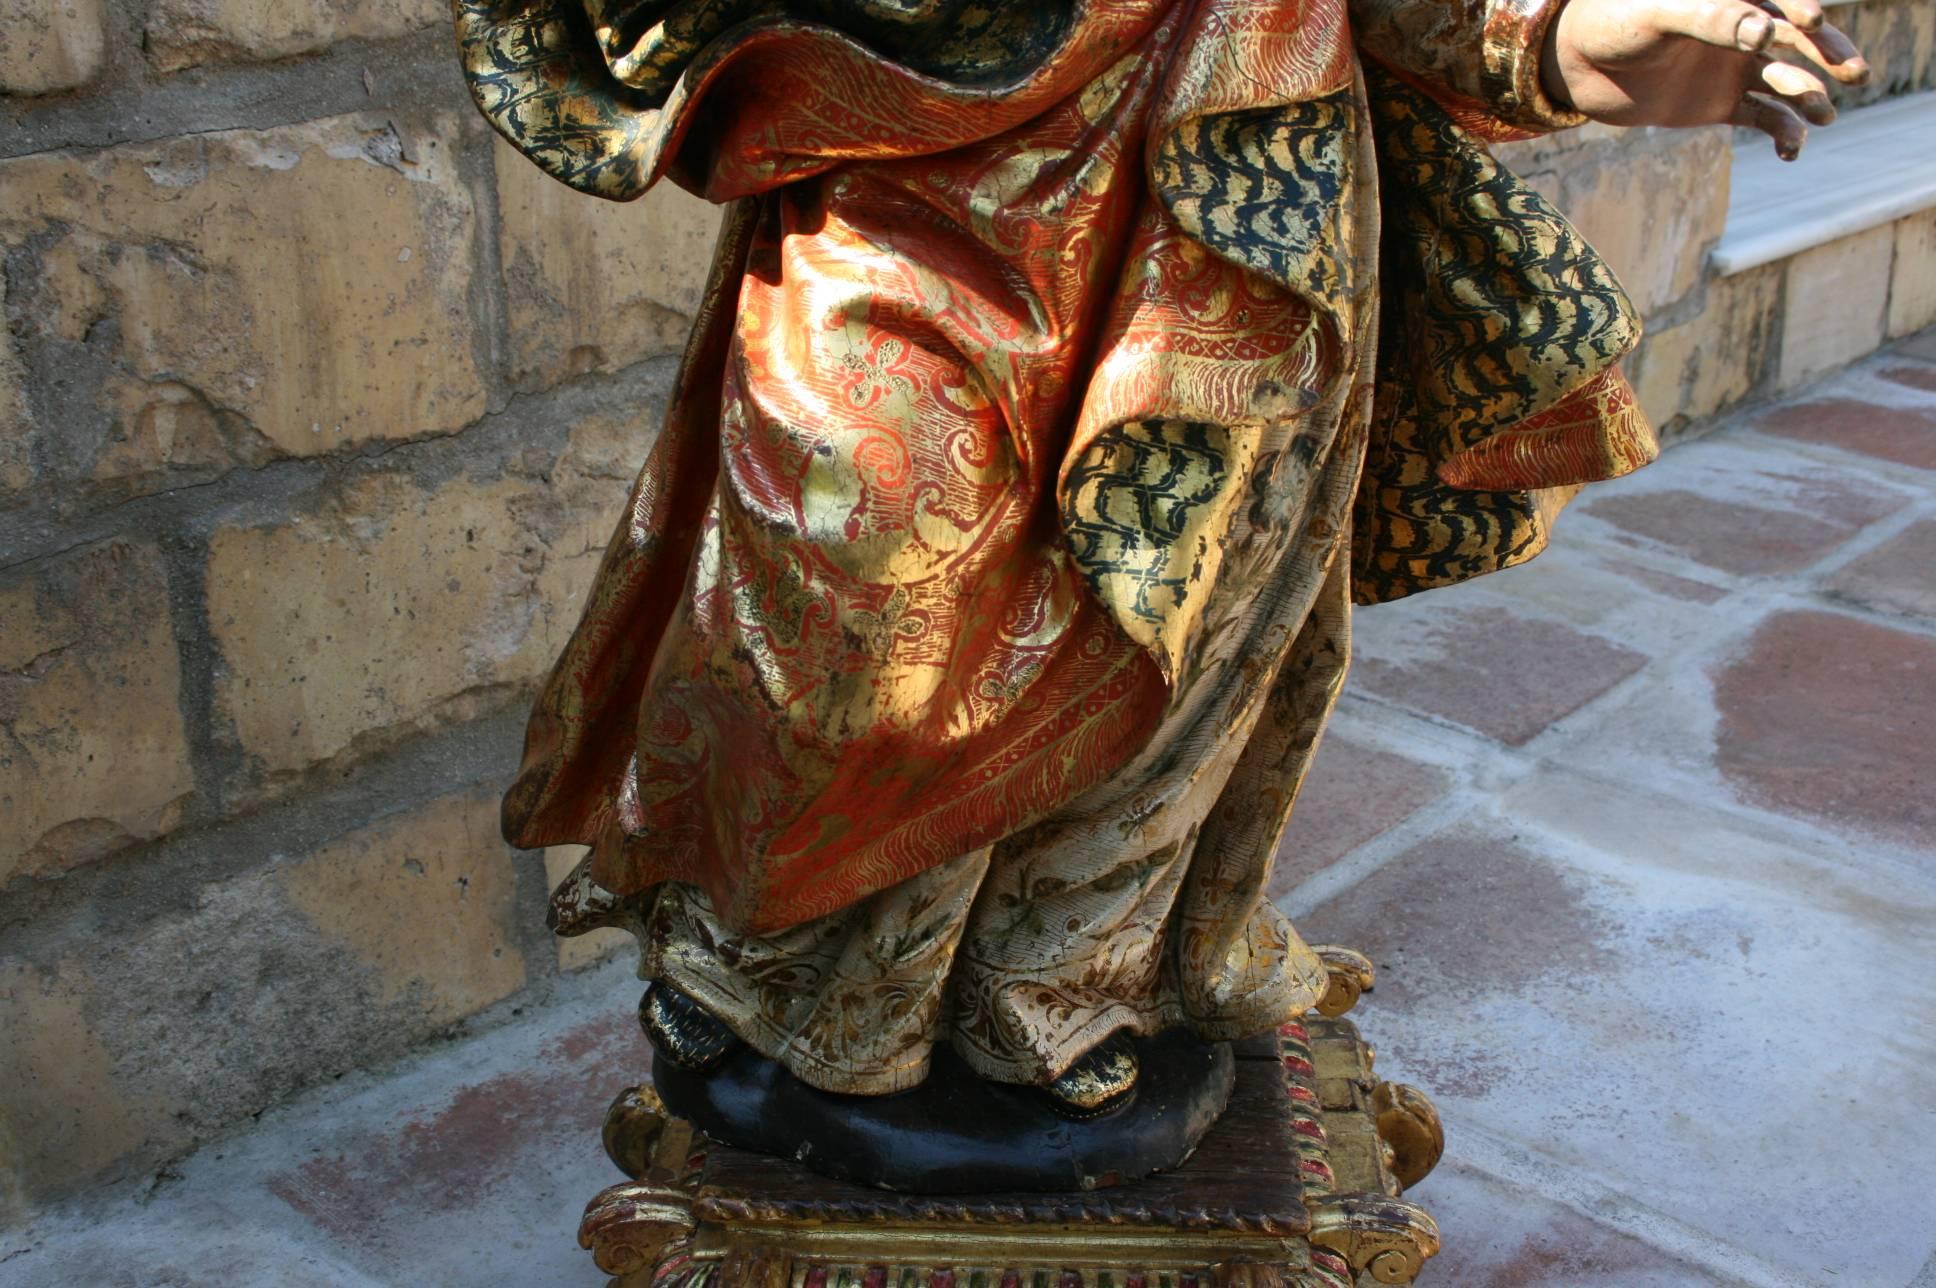 Polychrome Sculpture of the 17th Century, from the Castilian Area 1